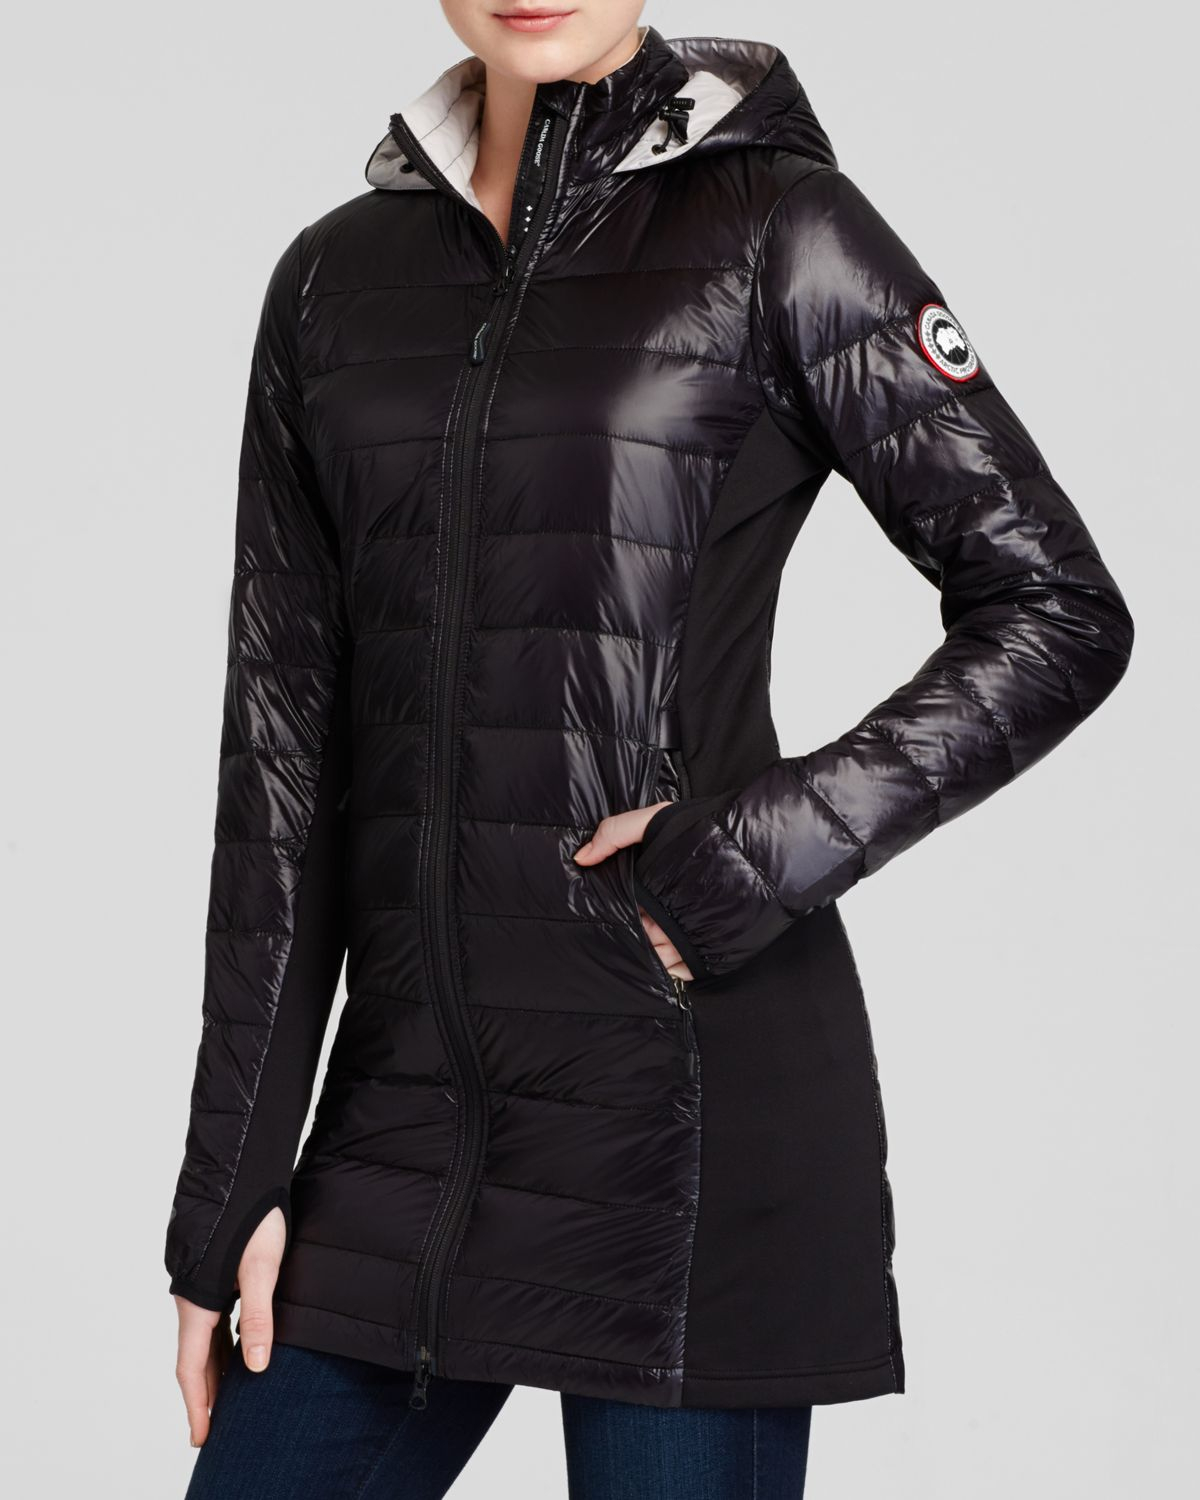 Canada Goose chateau parka replica shop - Save Up To 50% Off Canada Goose Sale To Bain Cheap On Sale